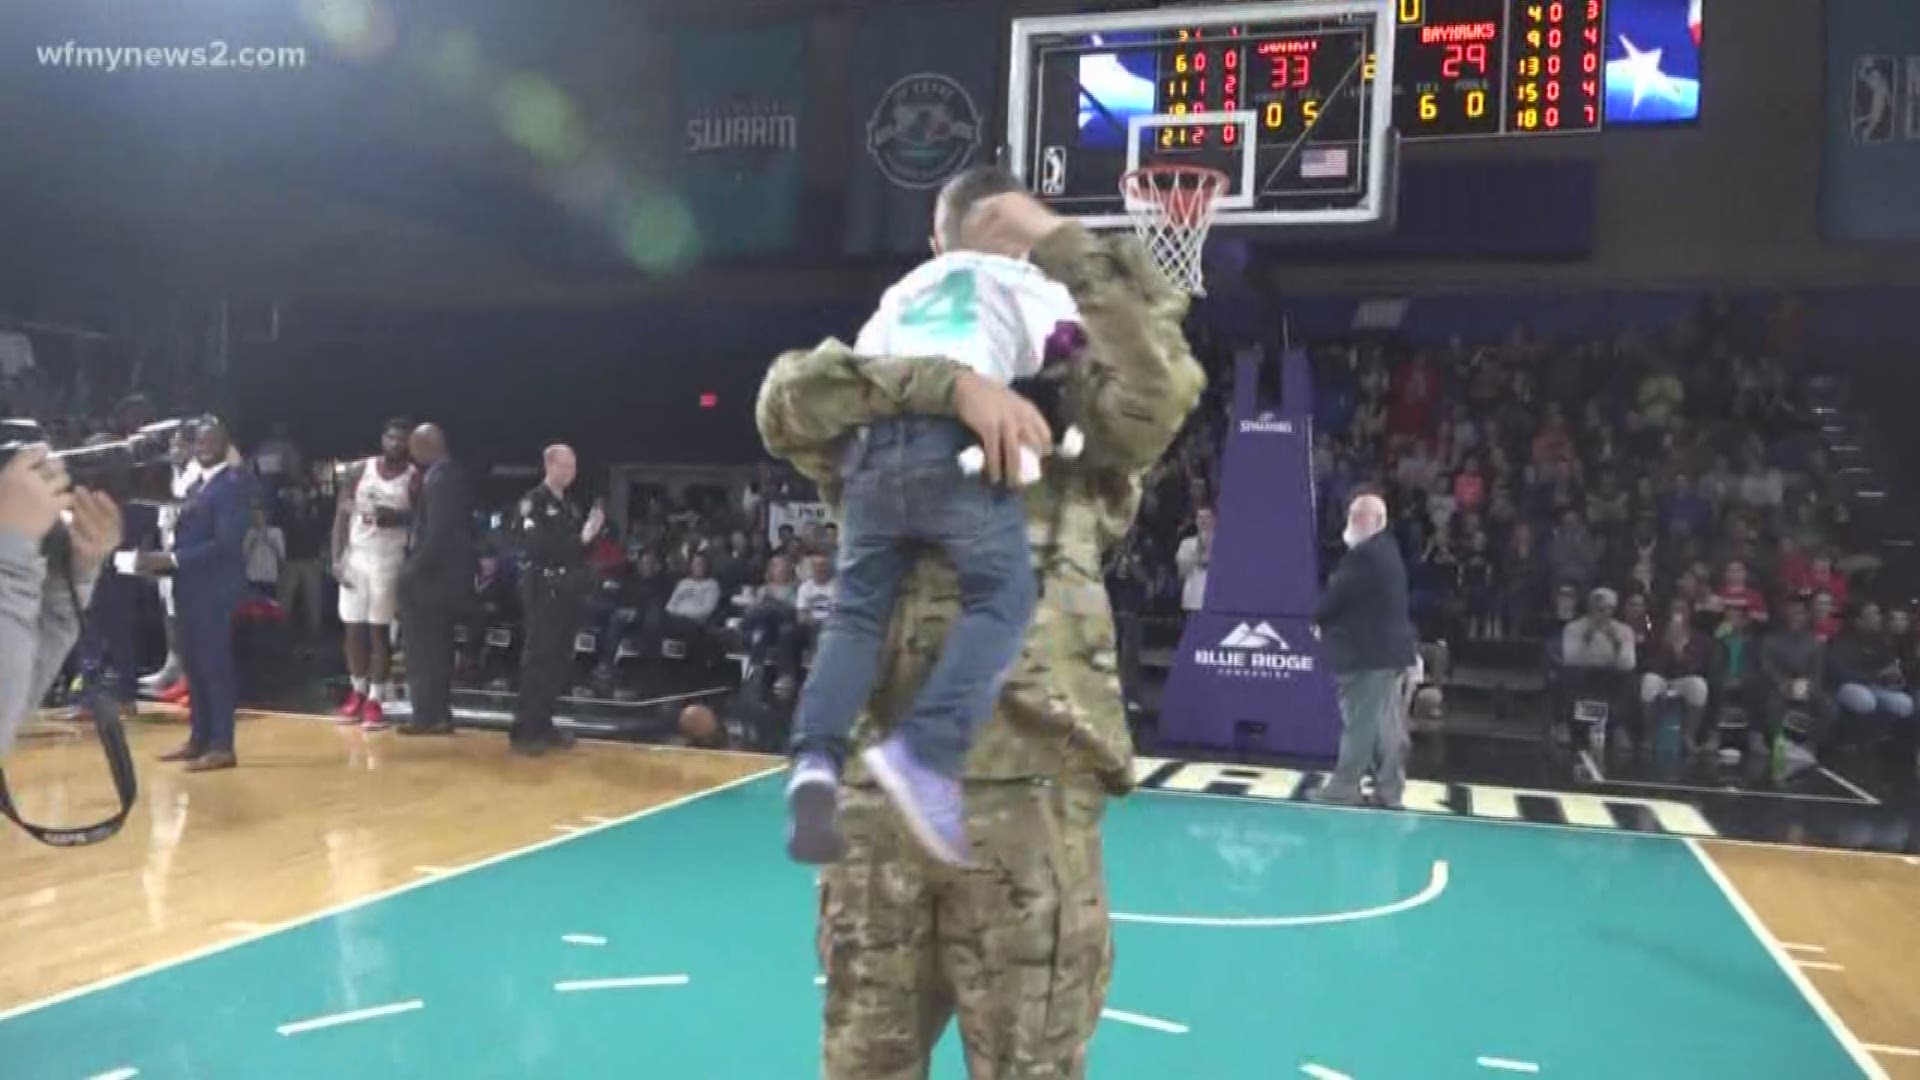 A local dad surprised his family at the Greensboro swarm GAME TODAY